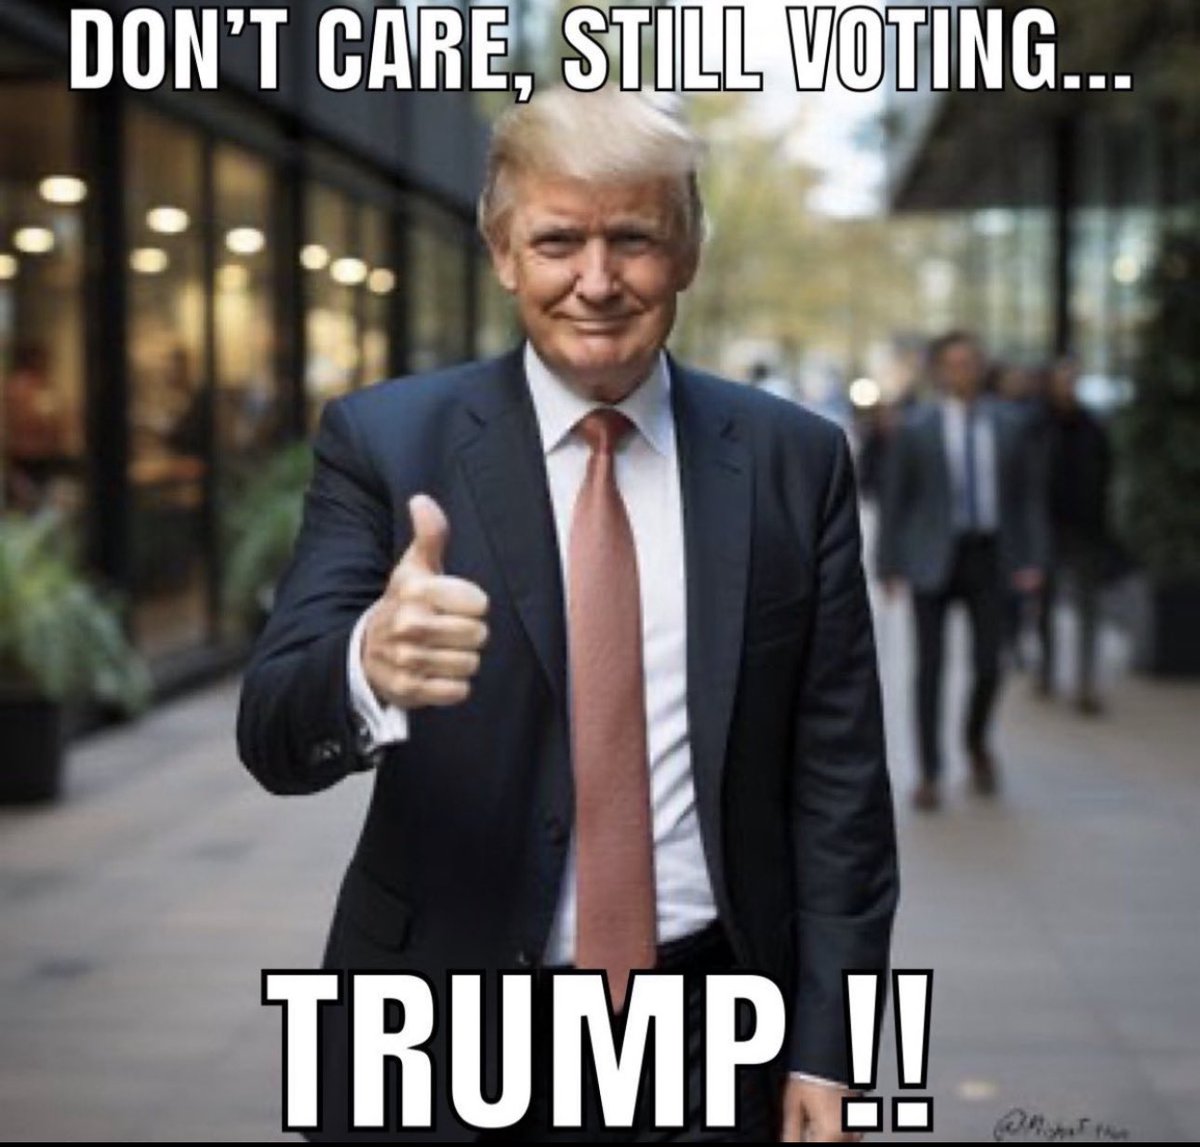 I don't care what the verdict is, I'm still voting for Trump